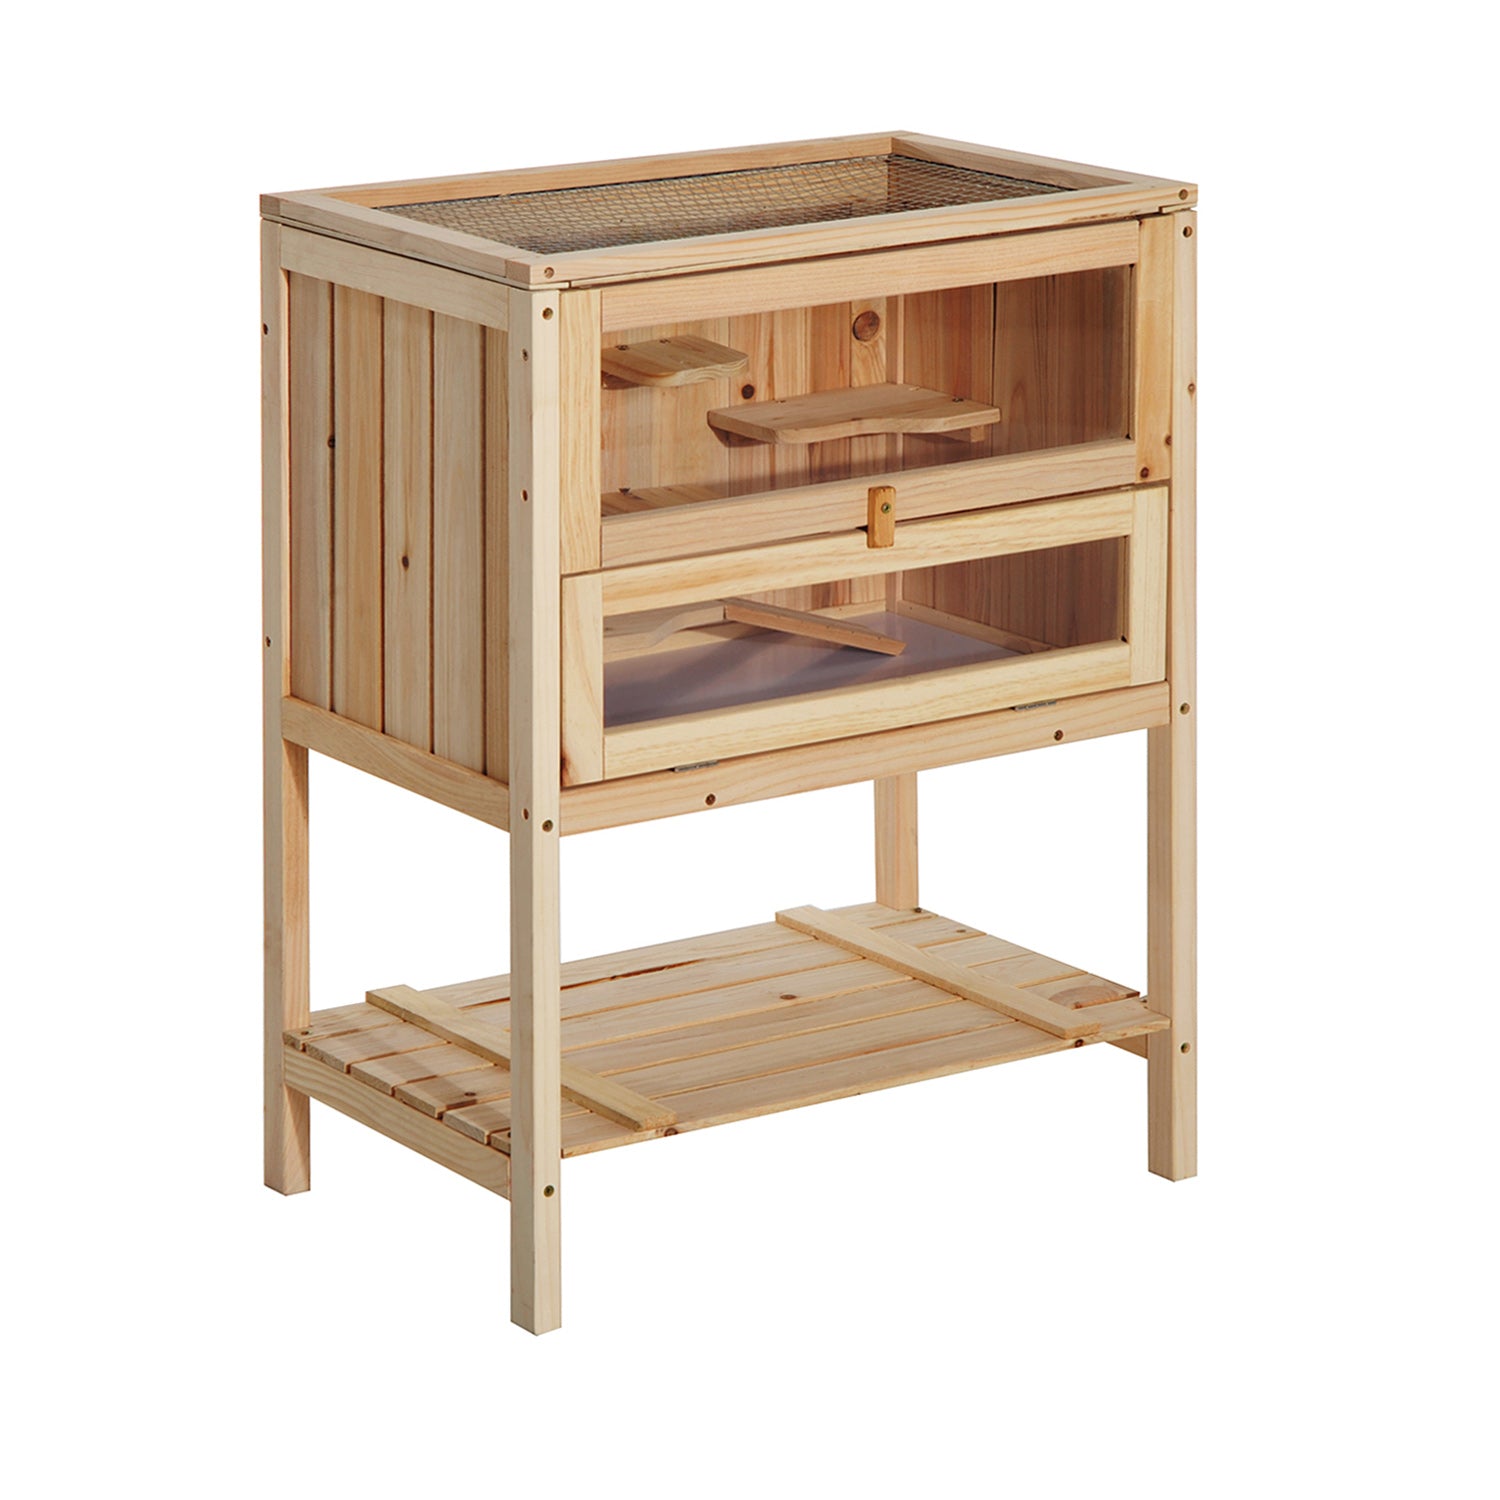 PawHut Wooden Hamster Cage w/ Storage Shelf - Openable Top for Gerbils and Mice  | TJ Hughes